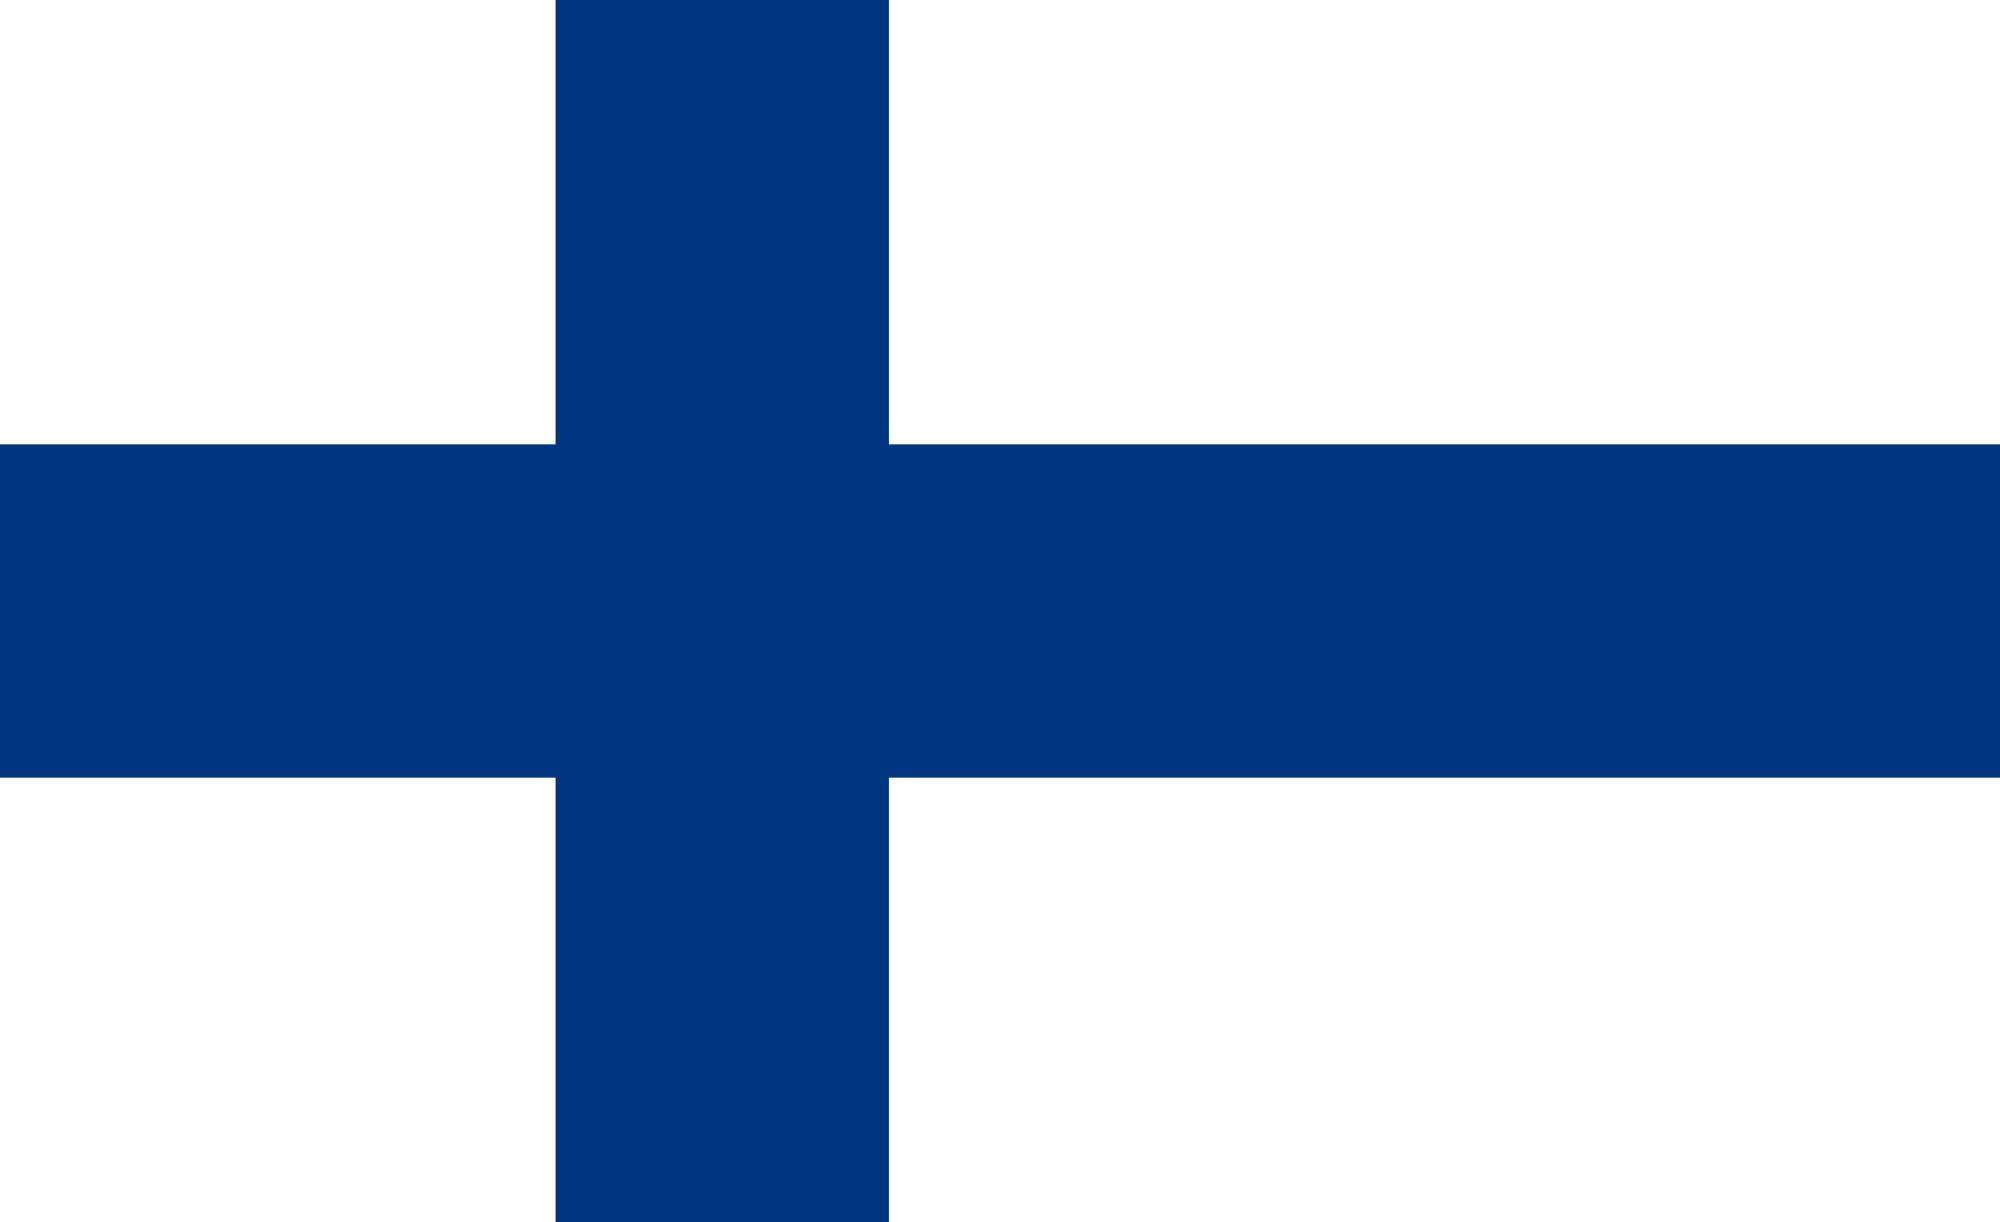 2000px-Flag_of_Finland.svg.png